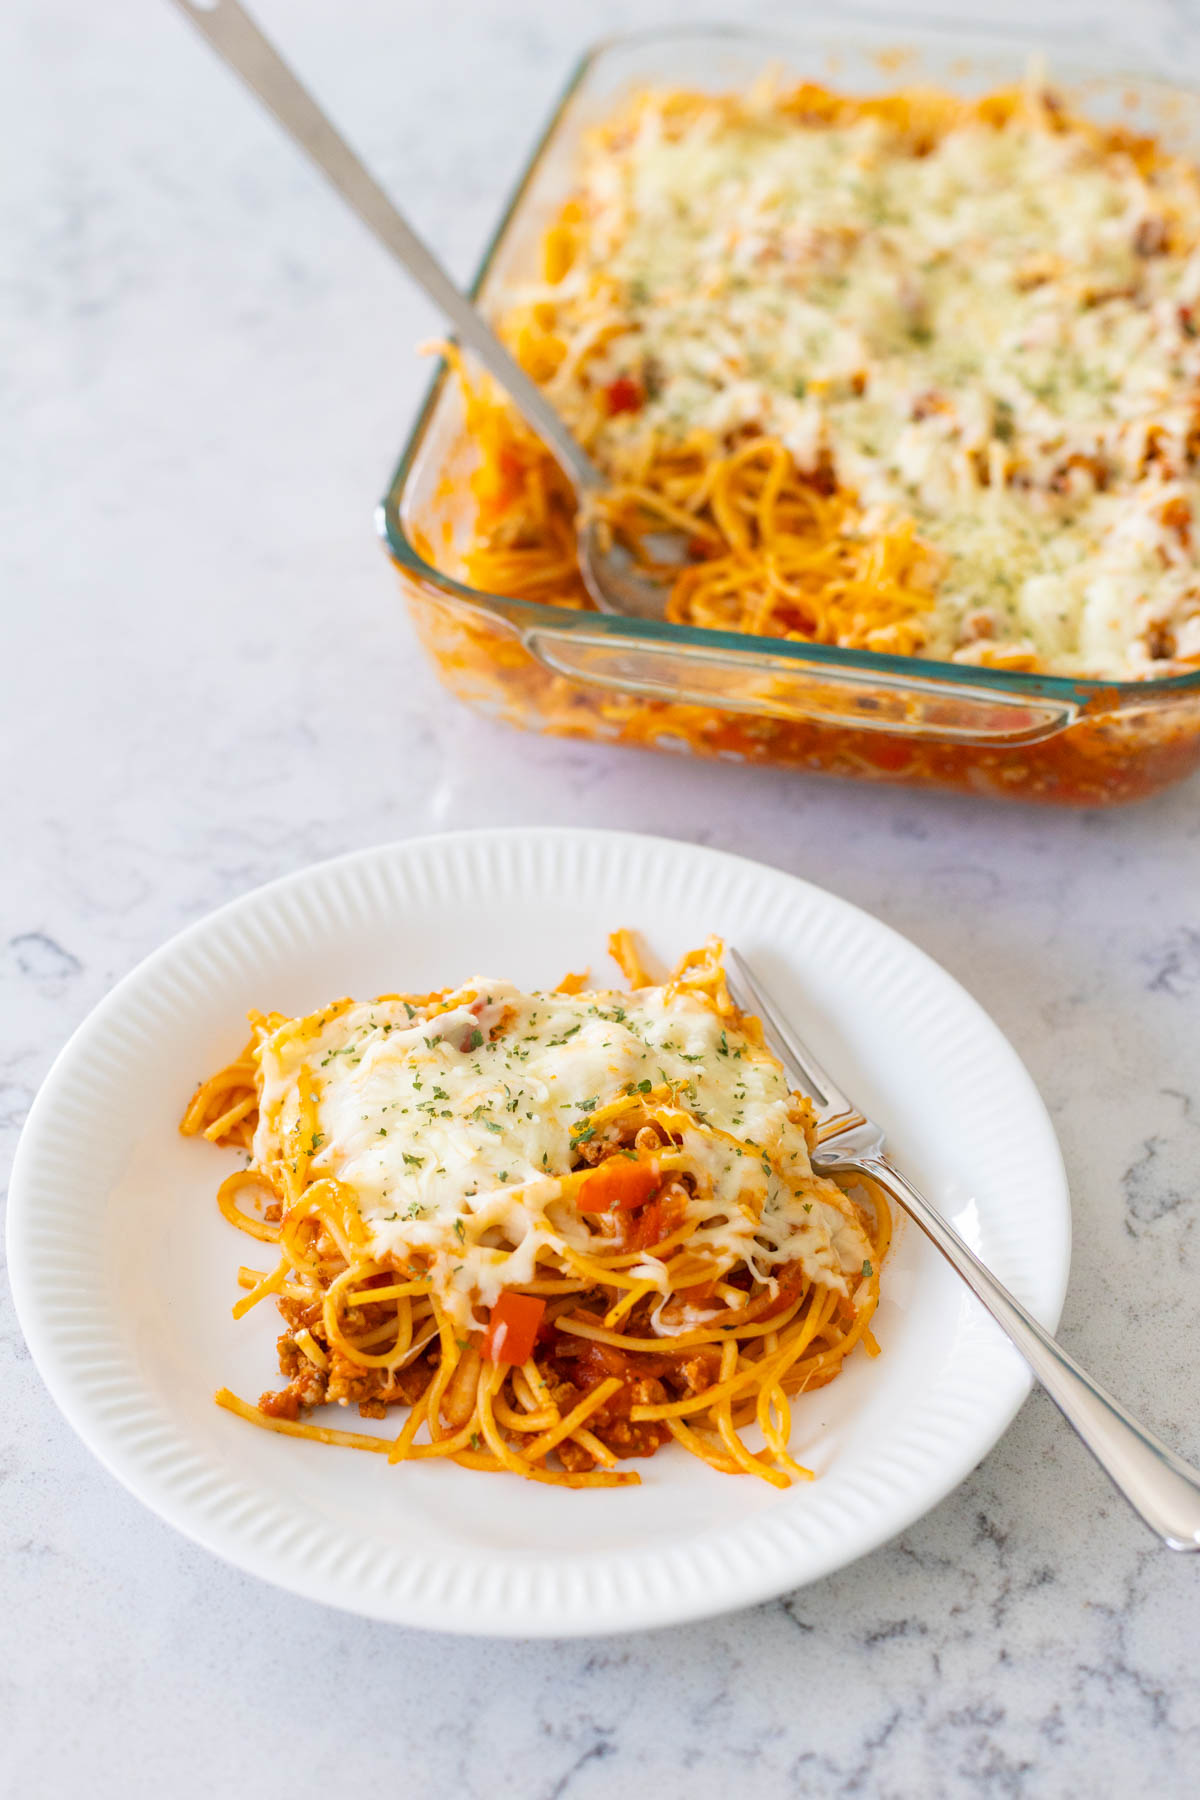 A portion of baked spaghetti has been served up onto a white plate with a fork. The baking dish is in the background with a serving spoon sticking out of it.